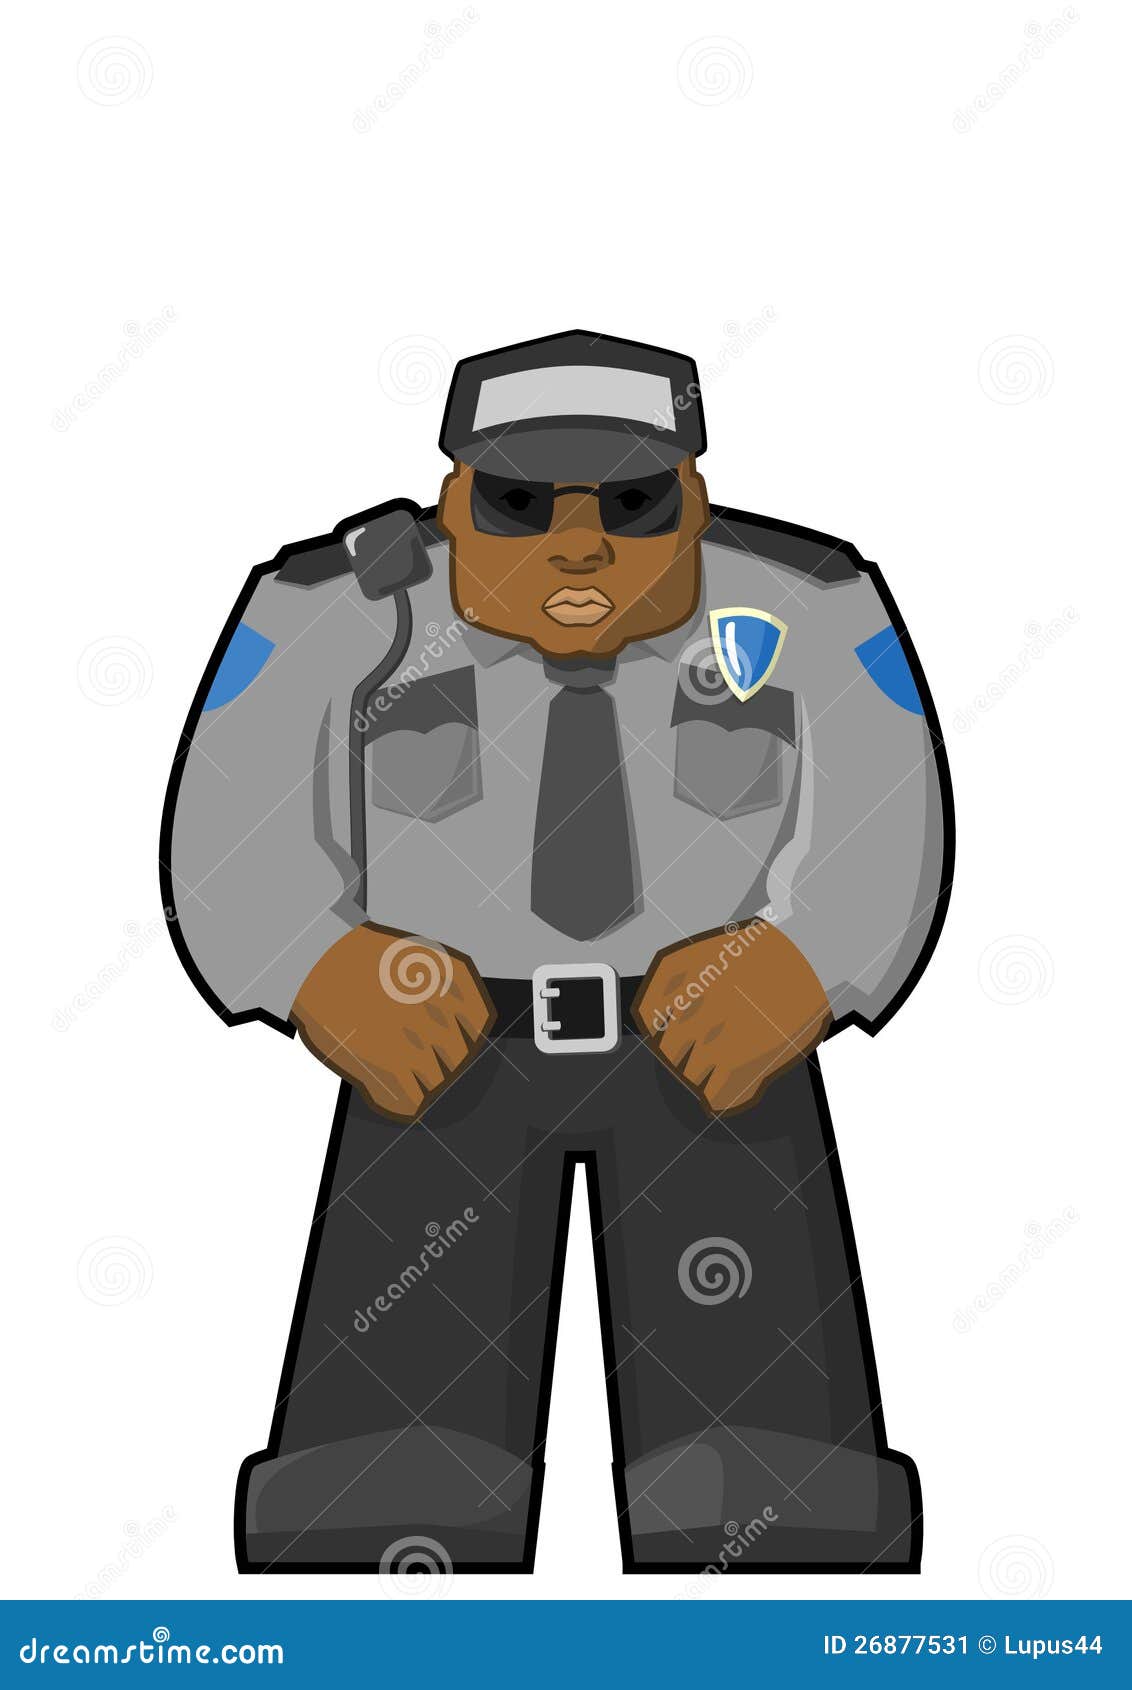 security officer clipart - photo #11